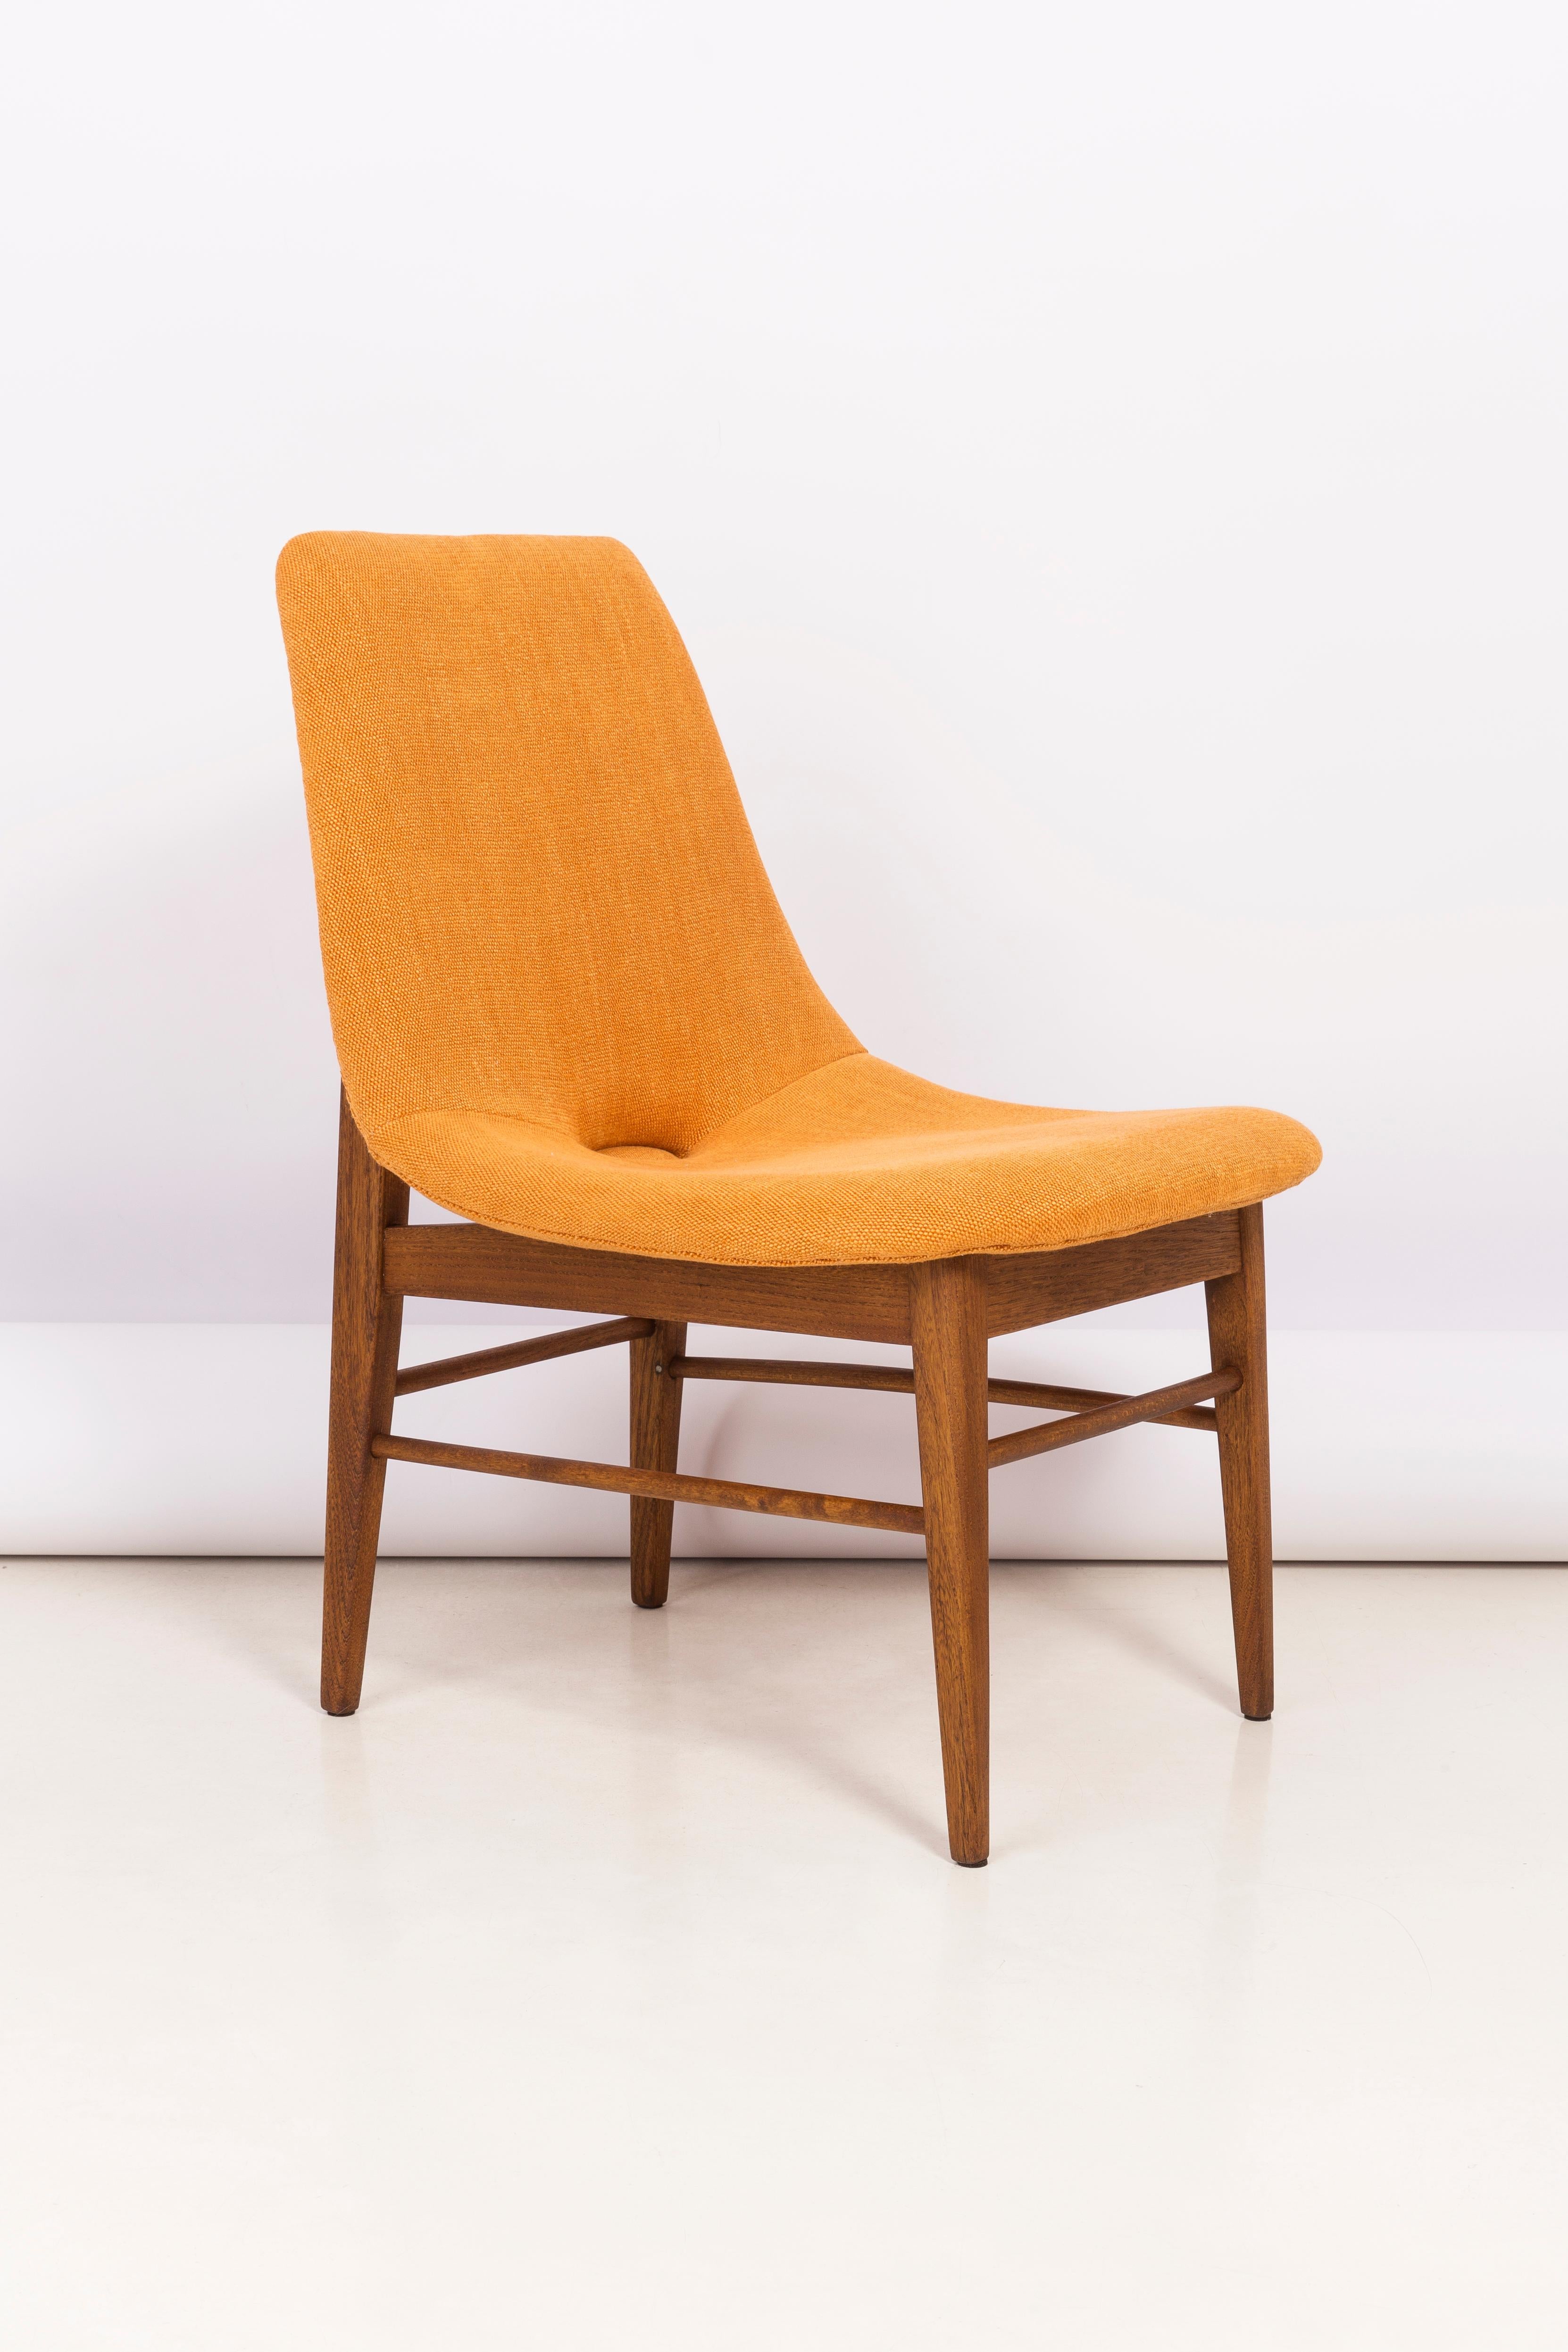 This rare chairs for collectors was designed in 1956 by Hanna Lachert for the LAD Cooperative in Poland. They were made either in the late 1950s or in the 1960s.

The furniture structure made of ash has undergone a complete renovation and has been